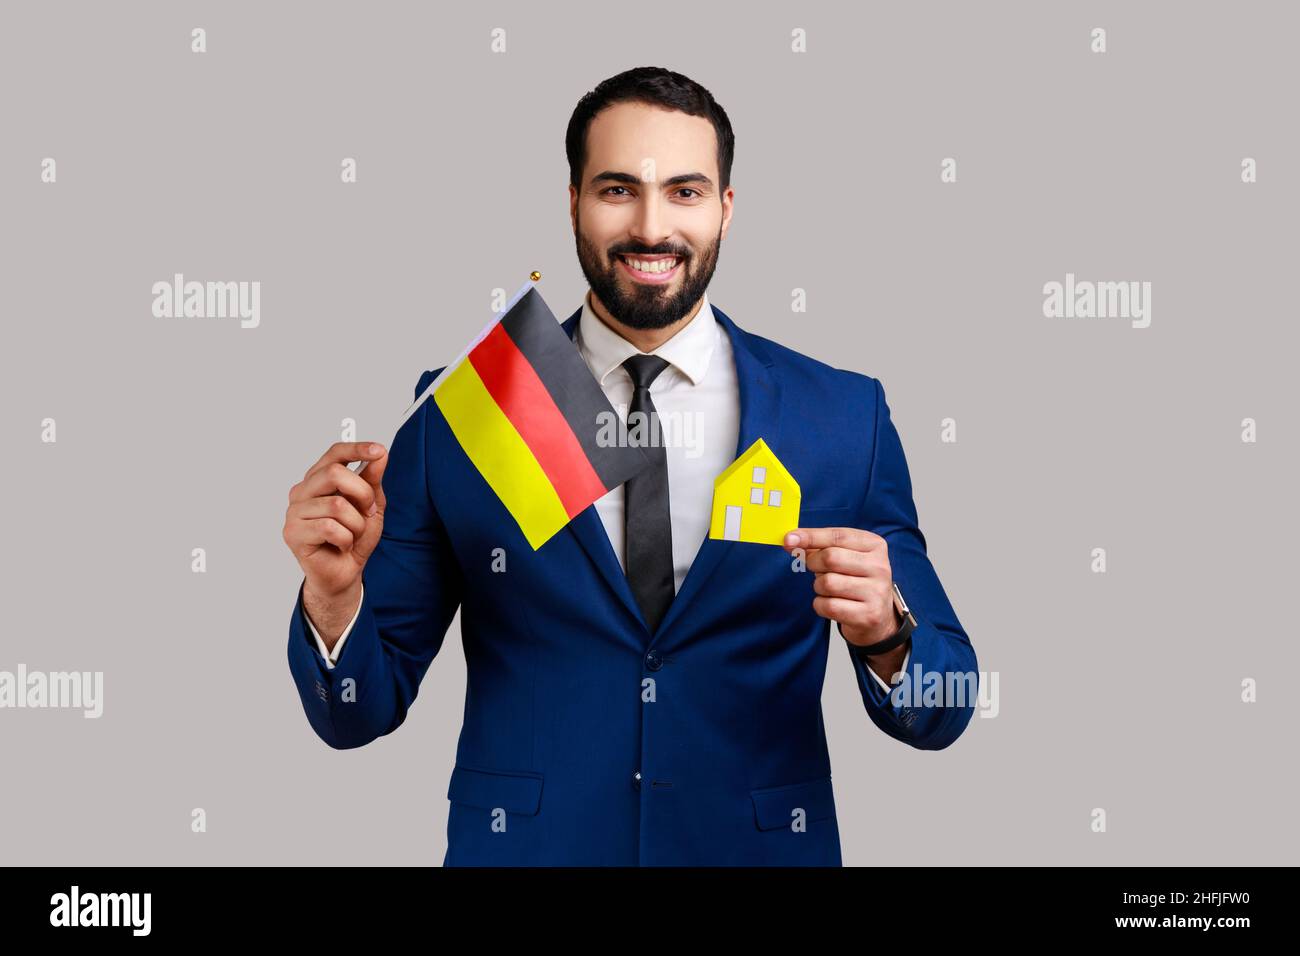 Satisfied man holding German flag and paper house, dreaming to buy his own house or flat in Germany, looking at camera, wearing official style suit. Indoor studio shot isolated on gray background. Stock Photo